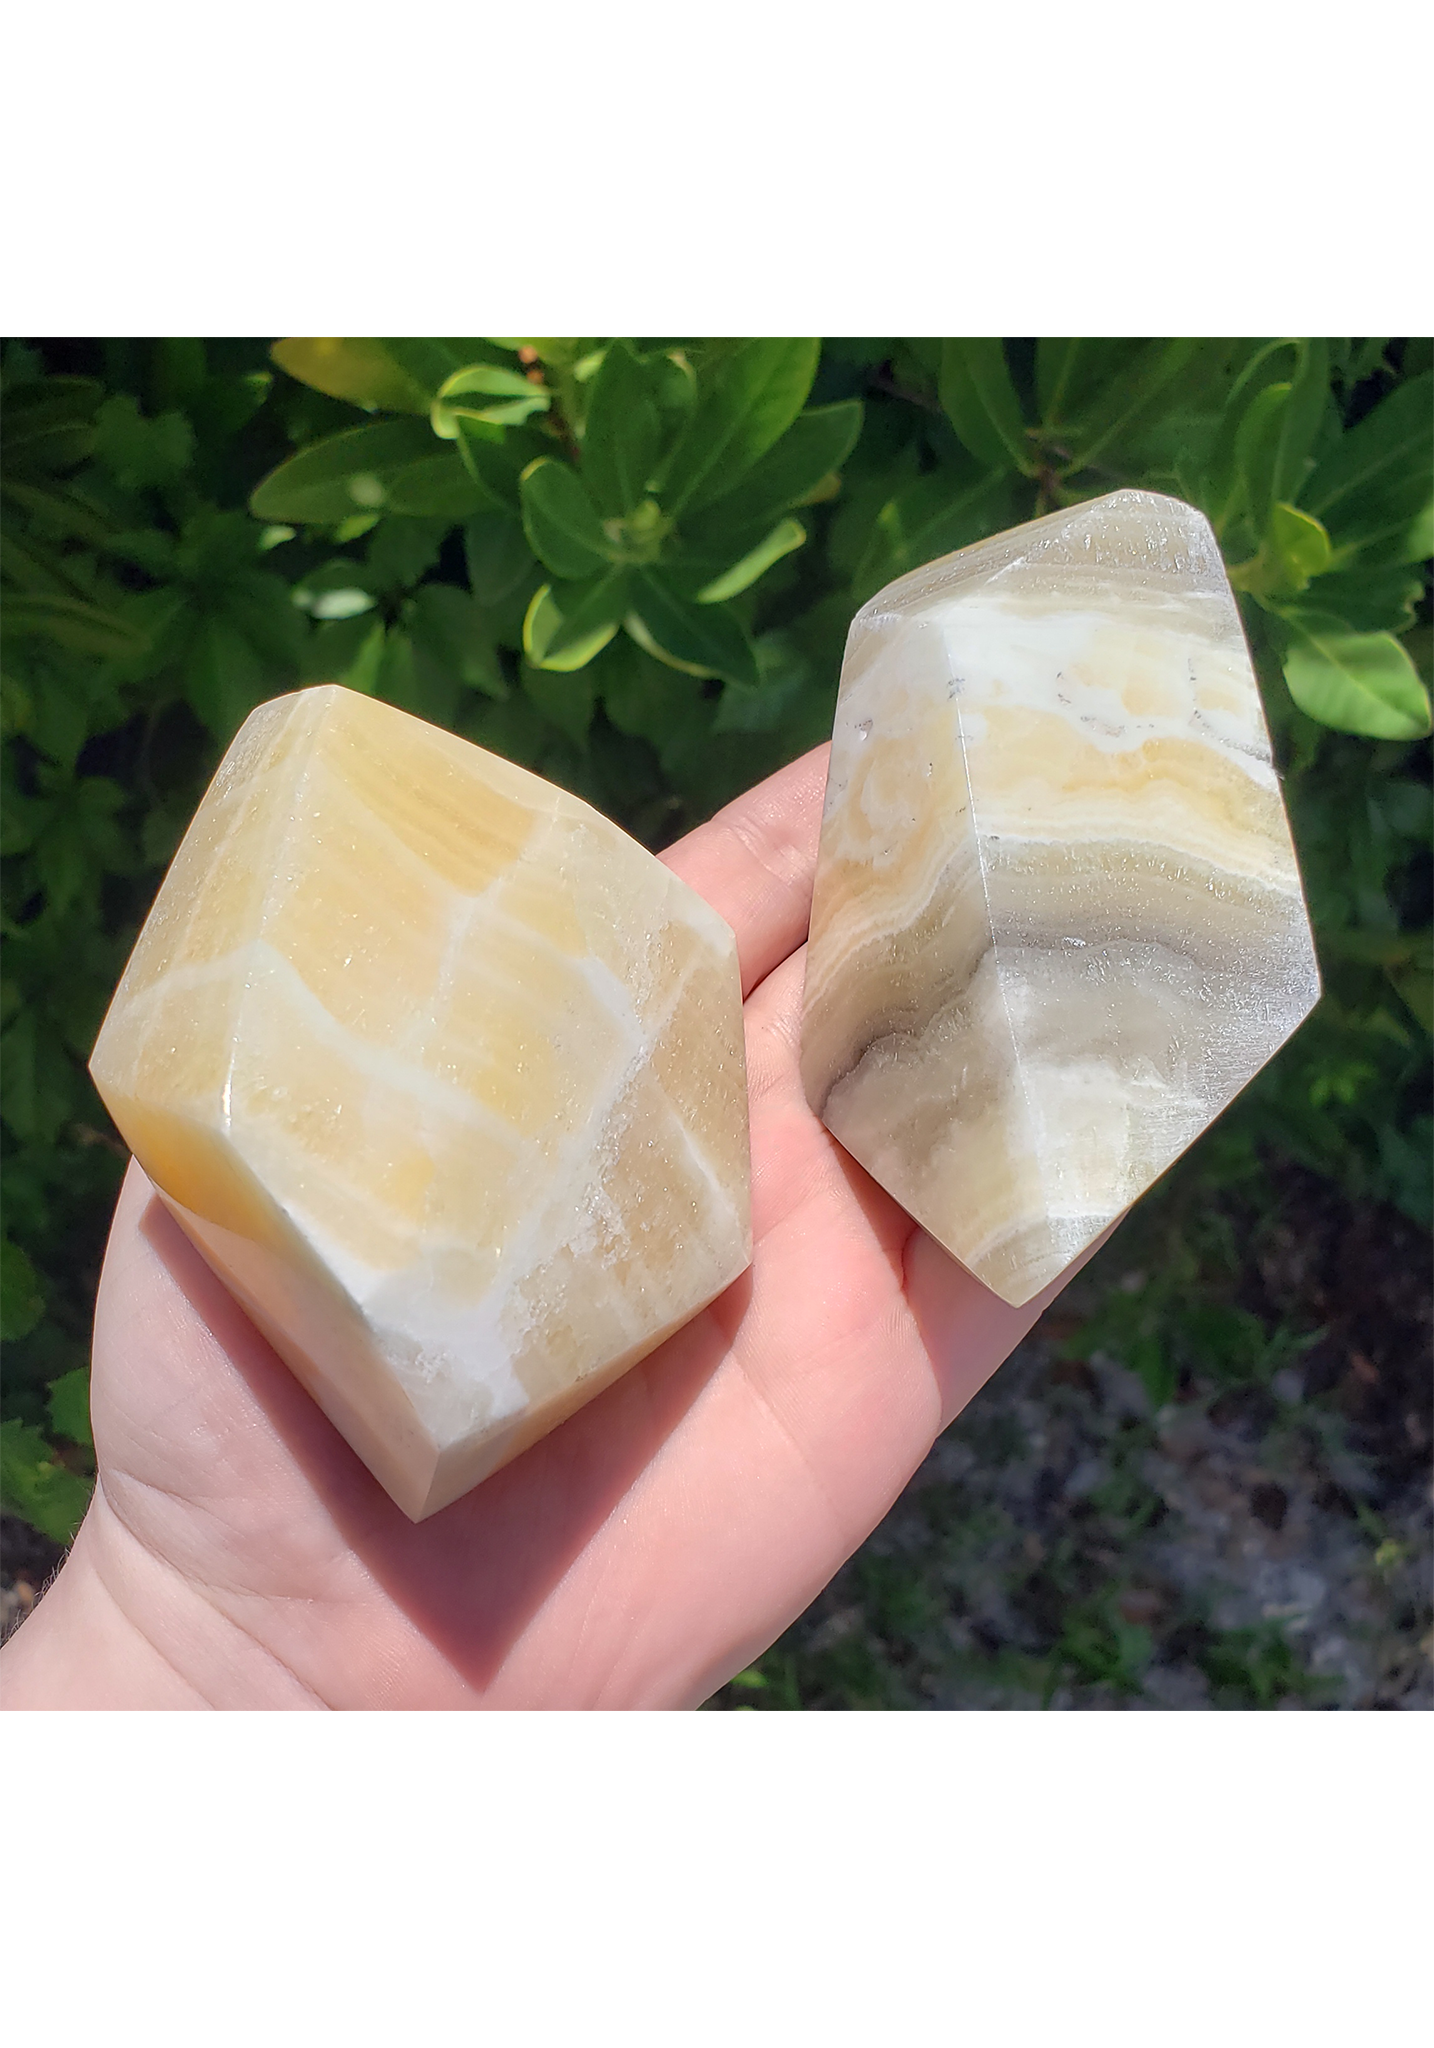 Zebra Calcite Gemstone Polygon Tower - These Make Excellent Paperweights!